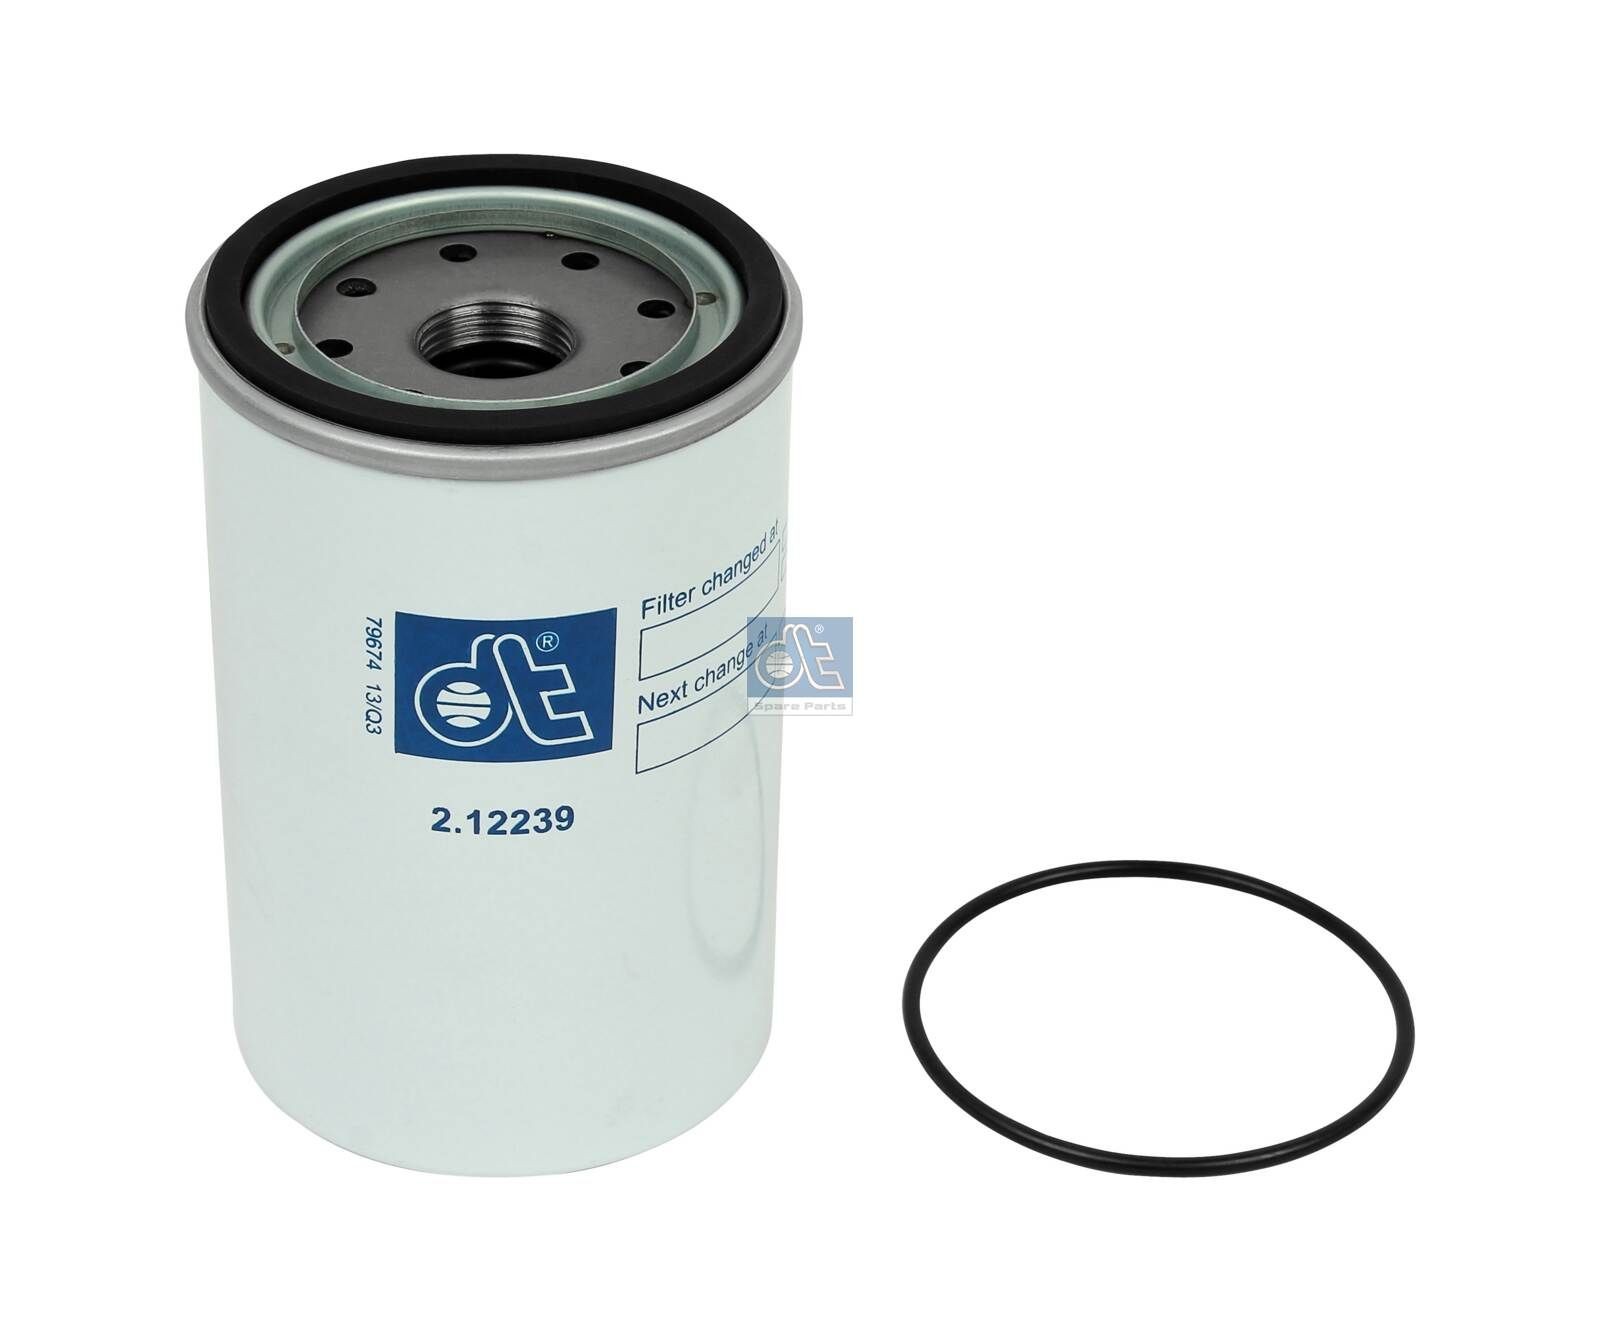 WK 940/33 x DT Spare Parts 2.12239 Fuel filter 2 0514 654